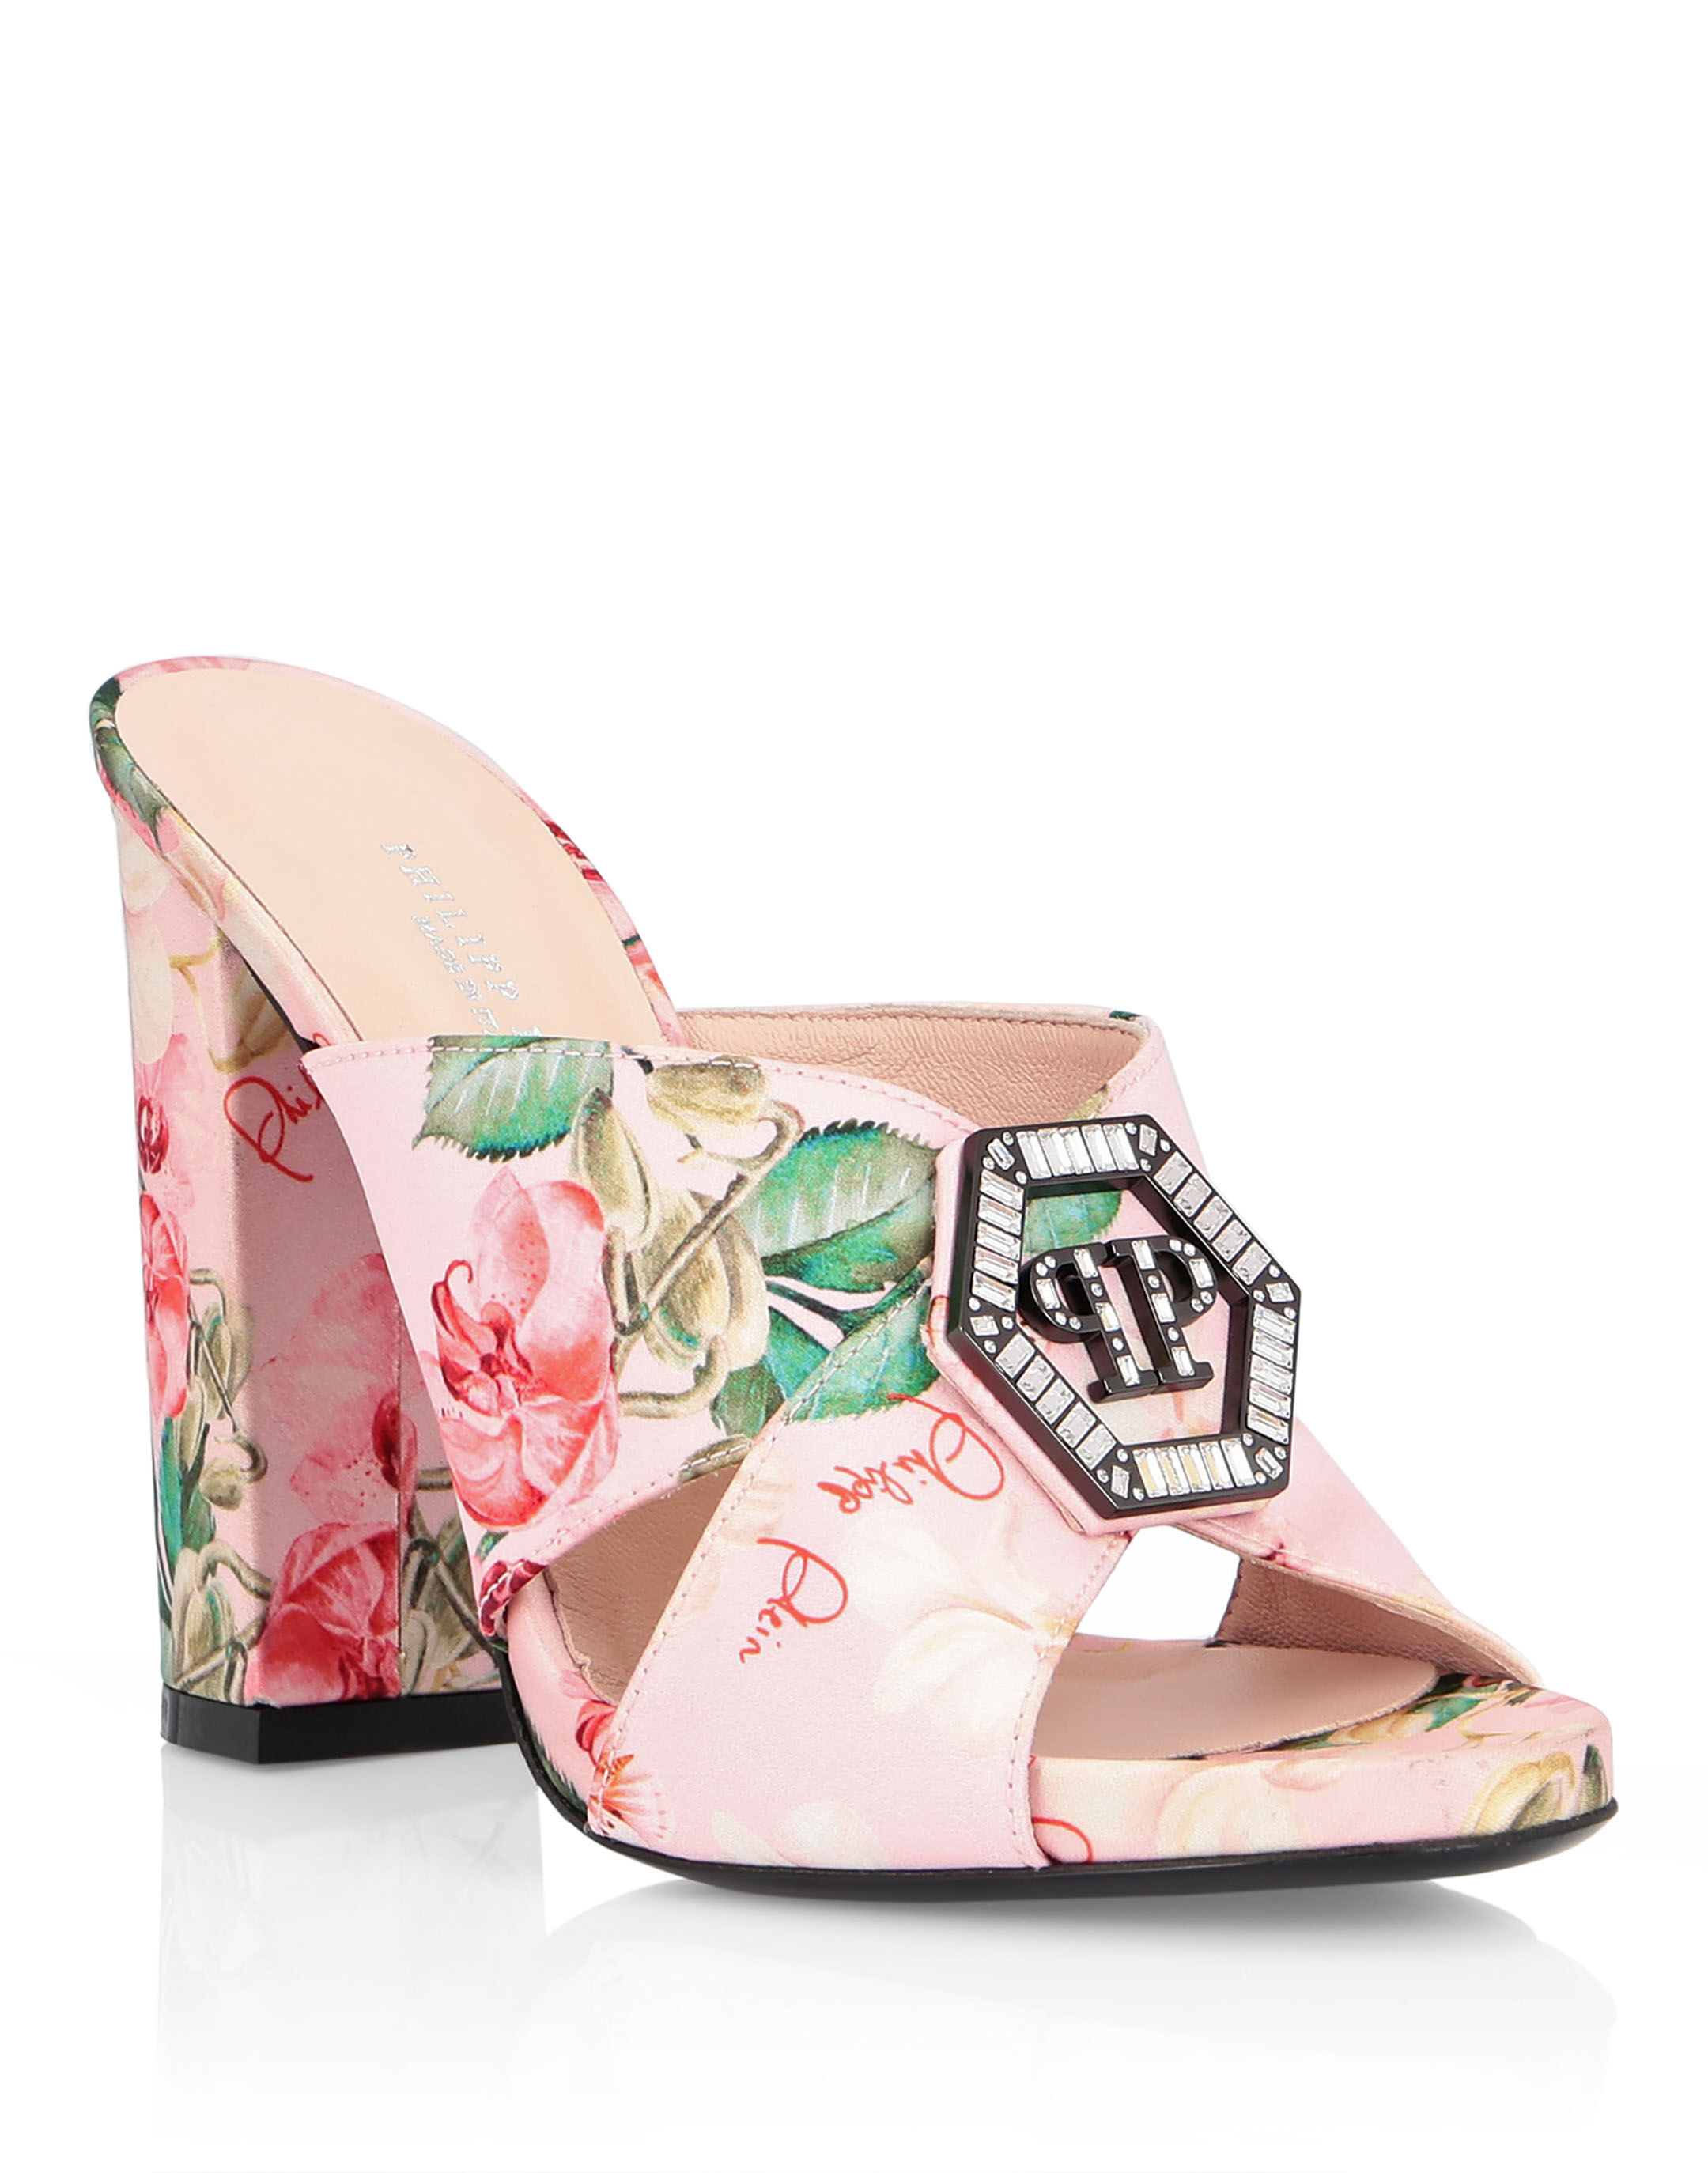 high heels with flowers on them